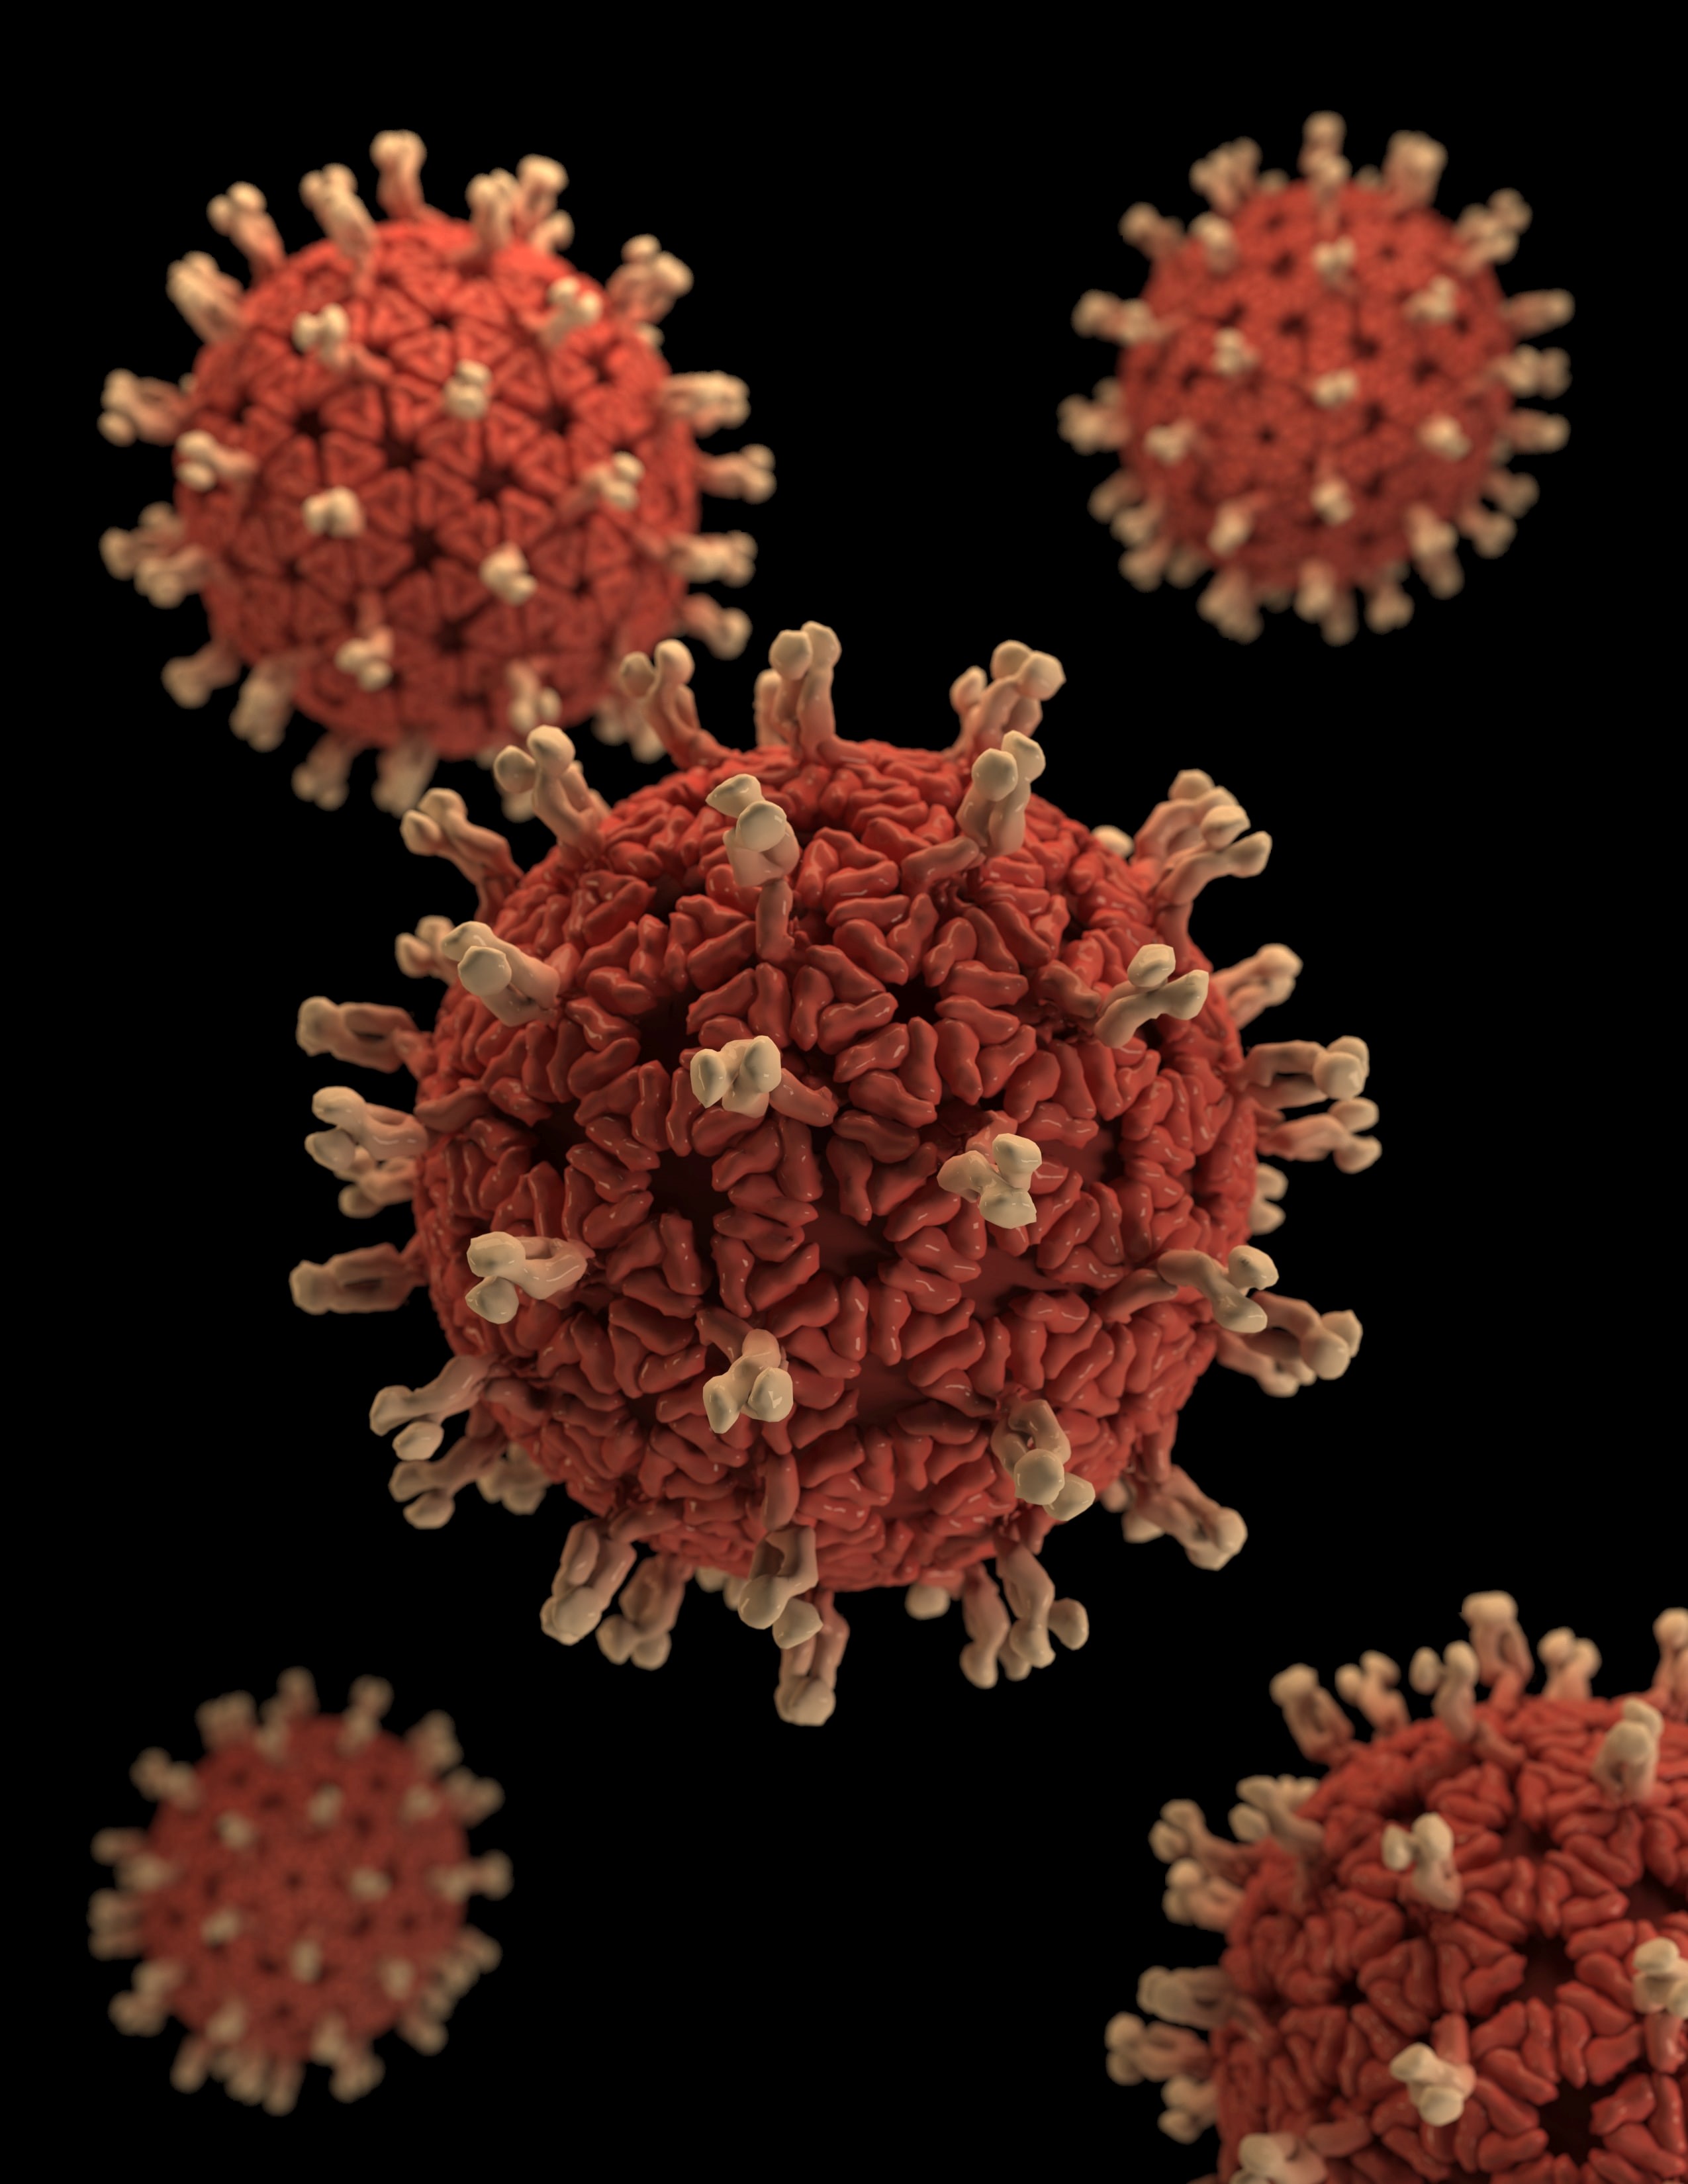 Cover image for  article: The Burgeoning Impact of Coronavirus, COVID-19, on the Advertising Industry